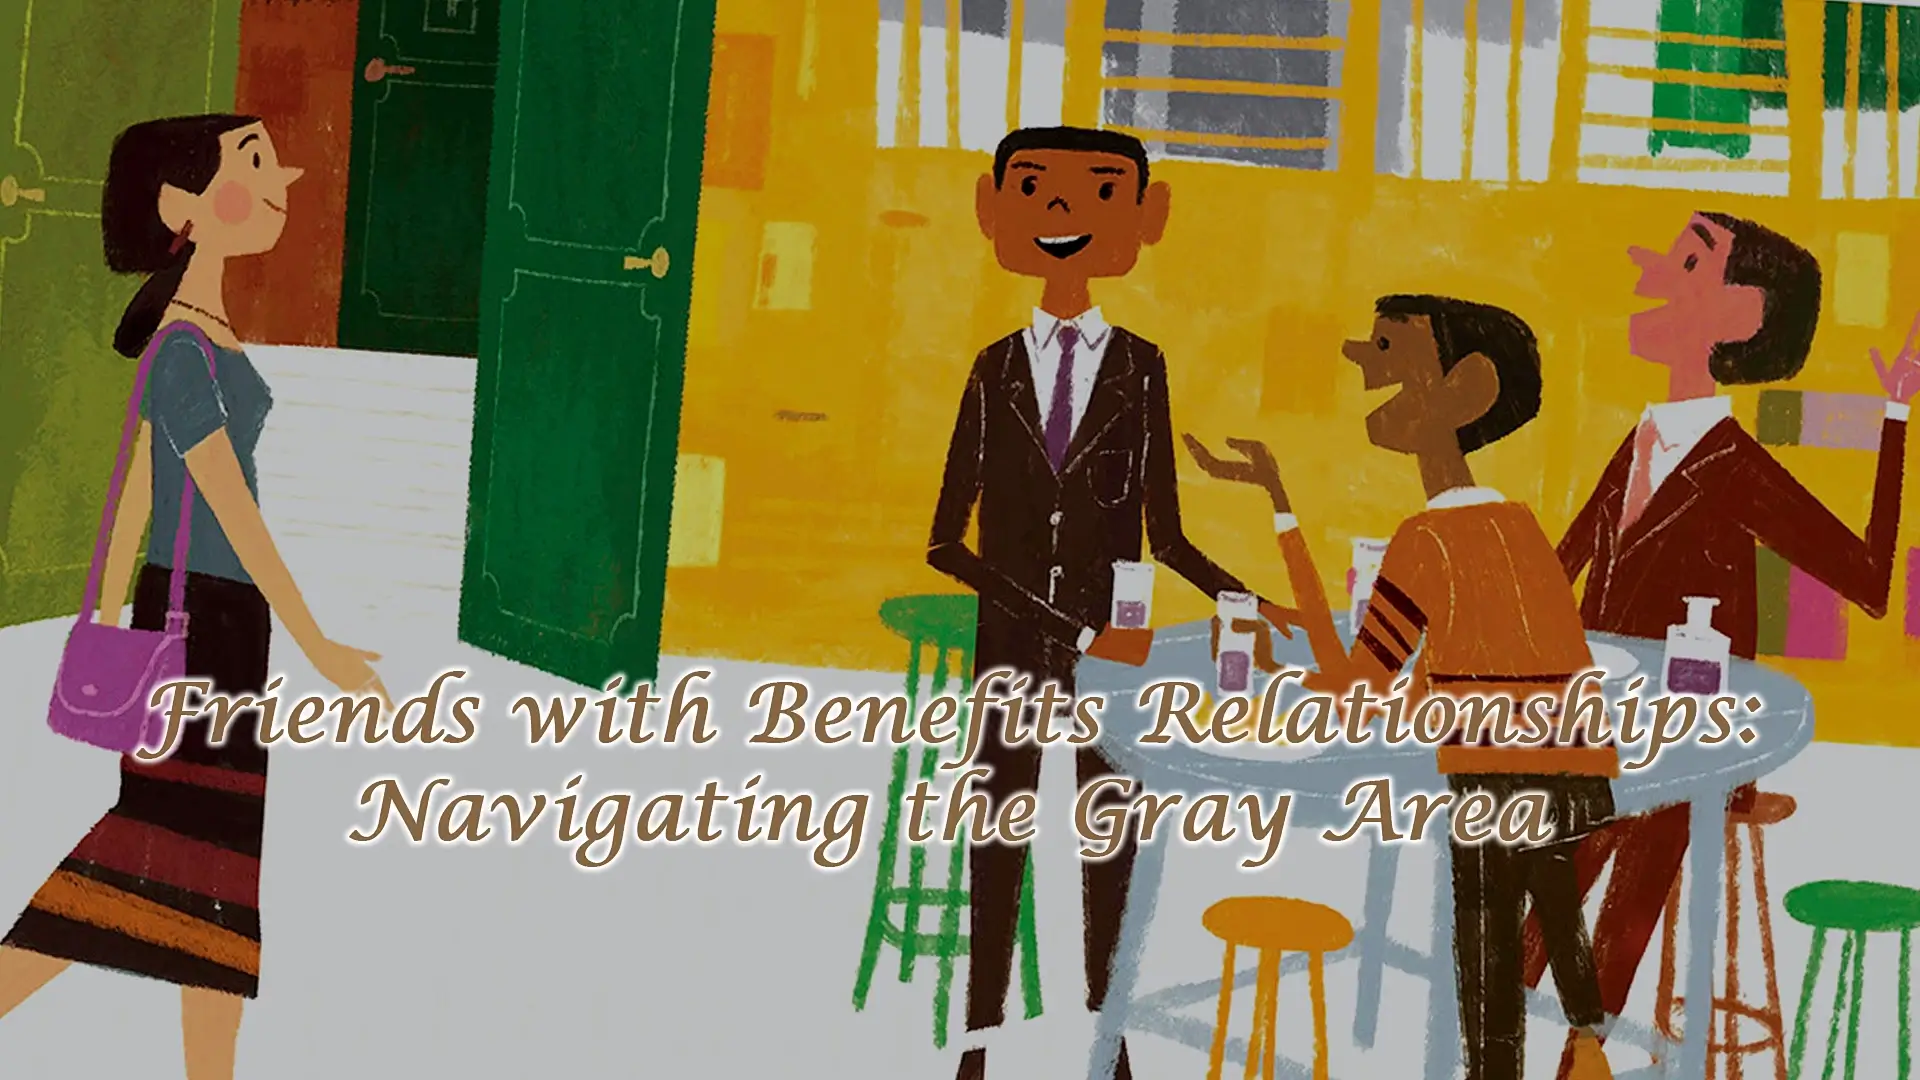 Friends with Benefits Relationships: Navigating the Gray Area